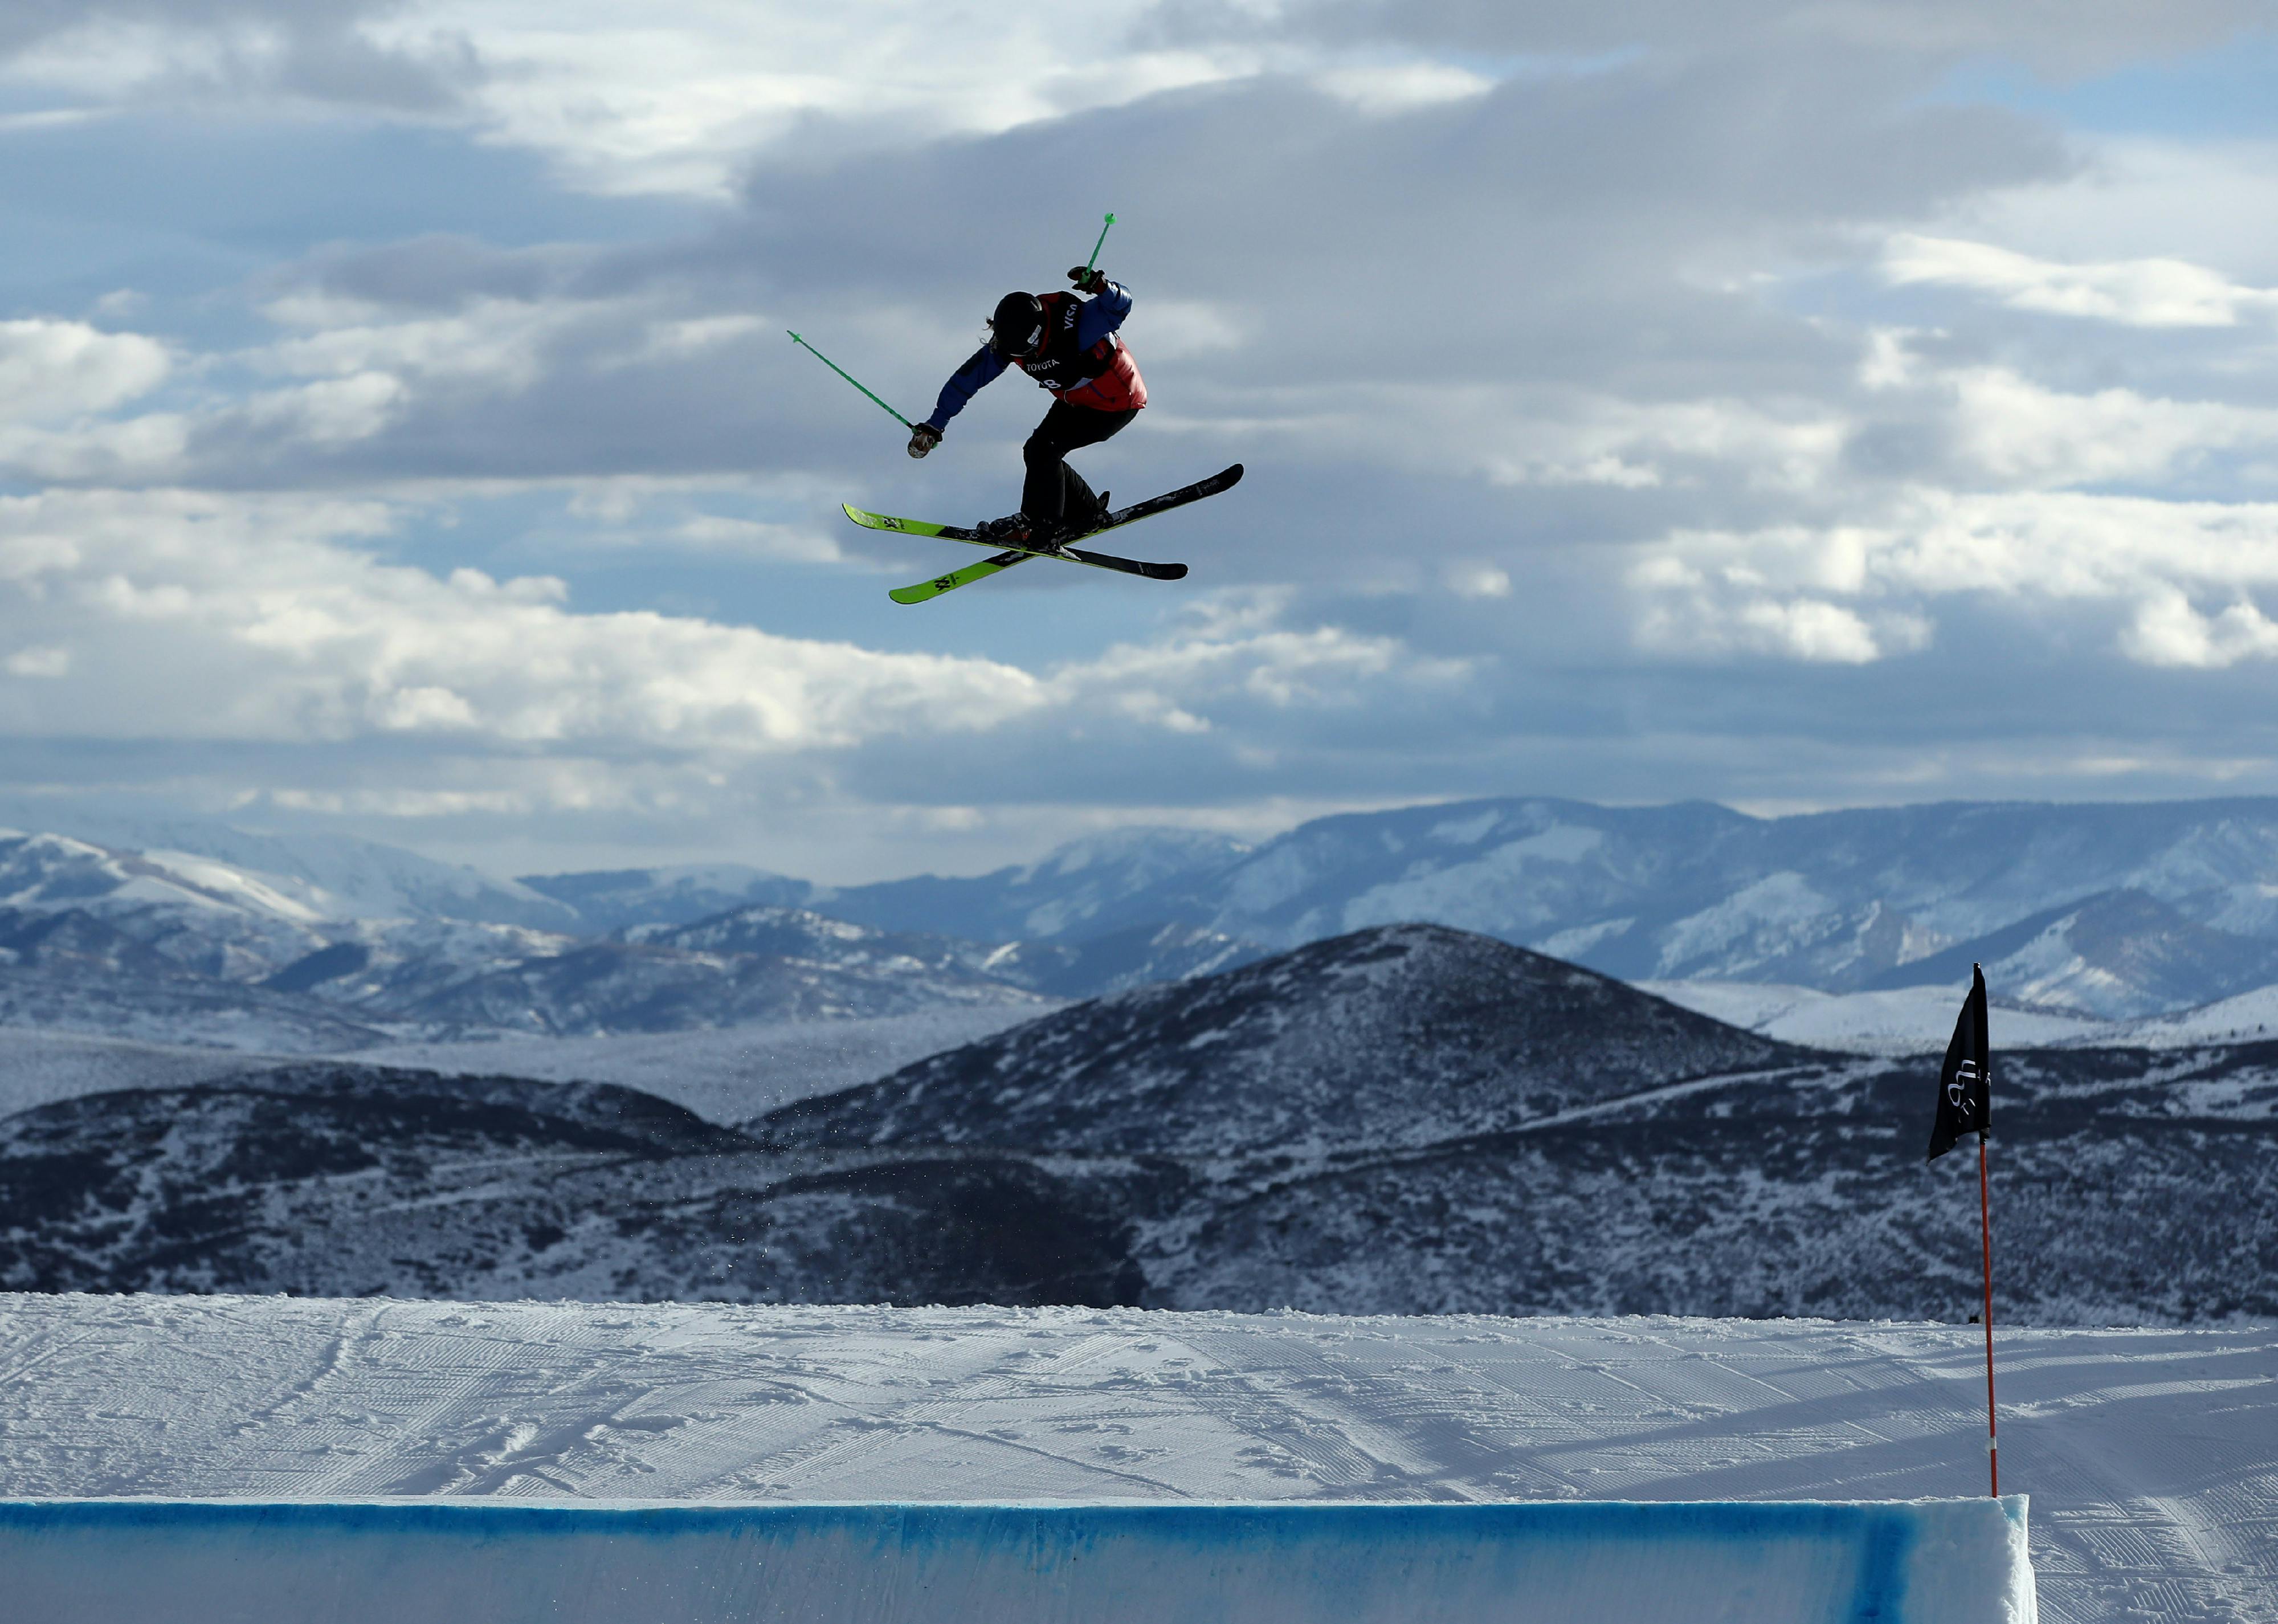 A skier flying through the air executing a jump with mountains in the background